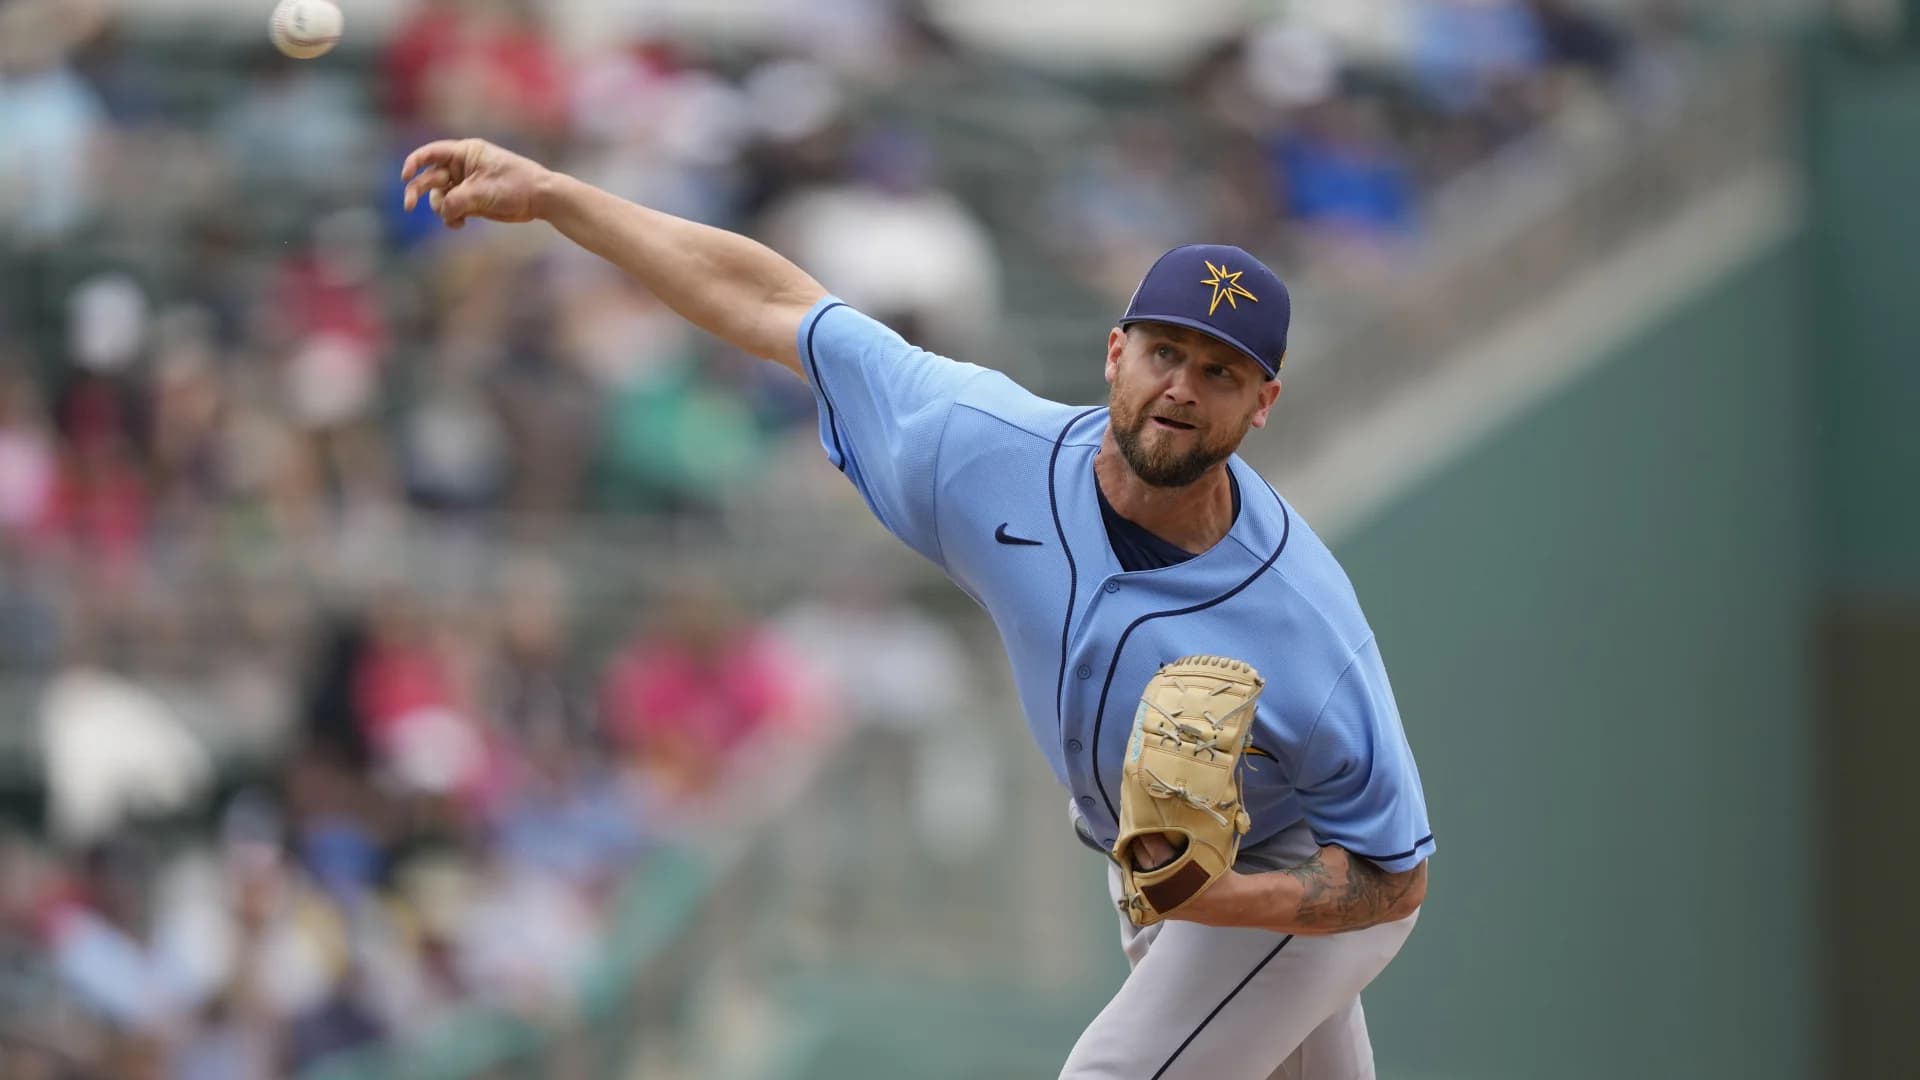 Reliever Colten Brewer acquired by Yanks from Rays for cash